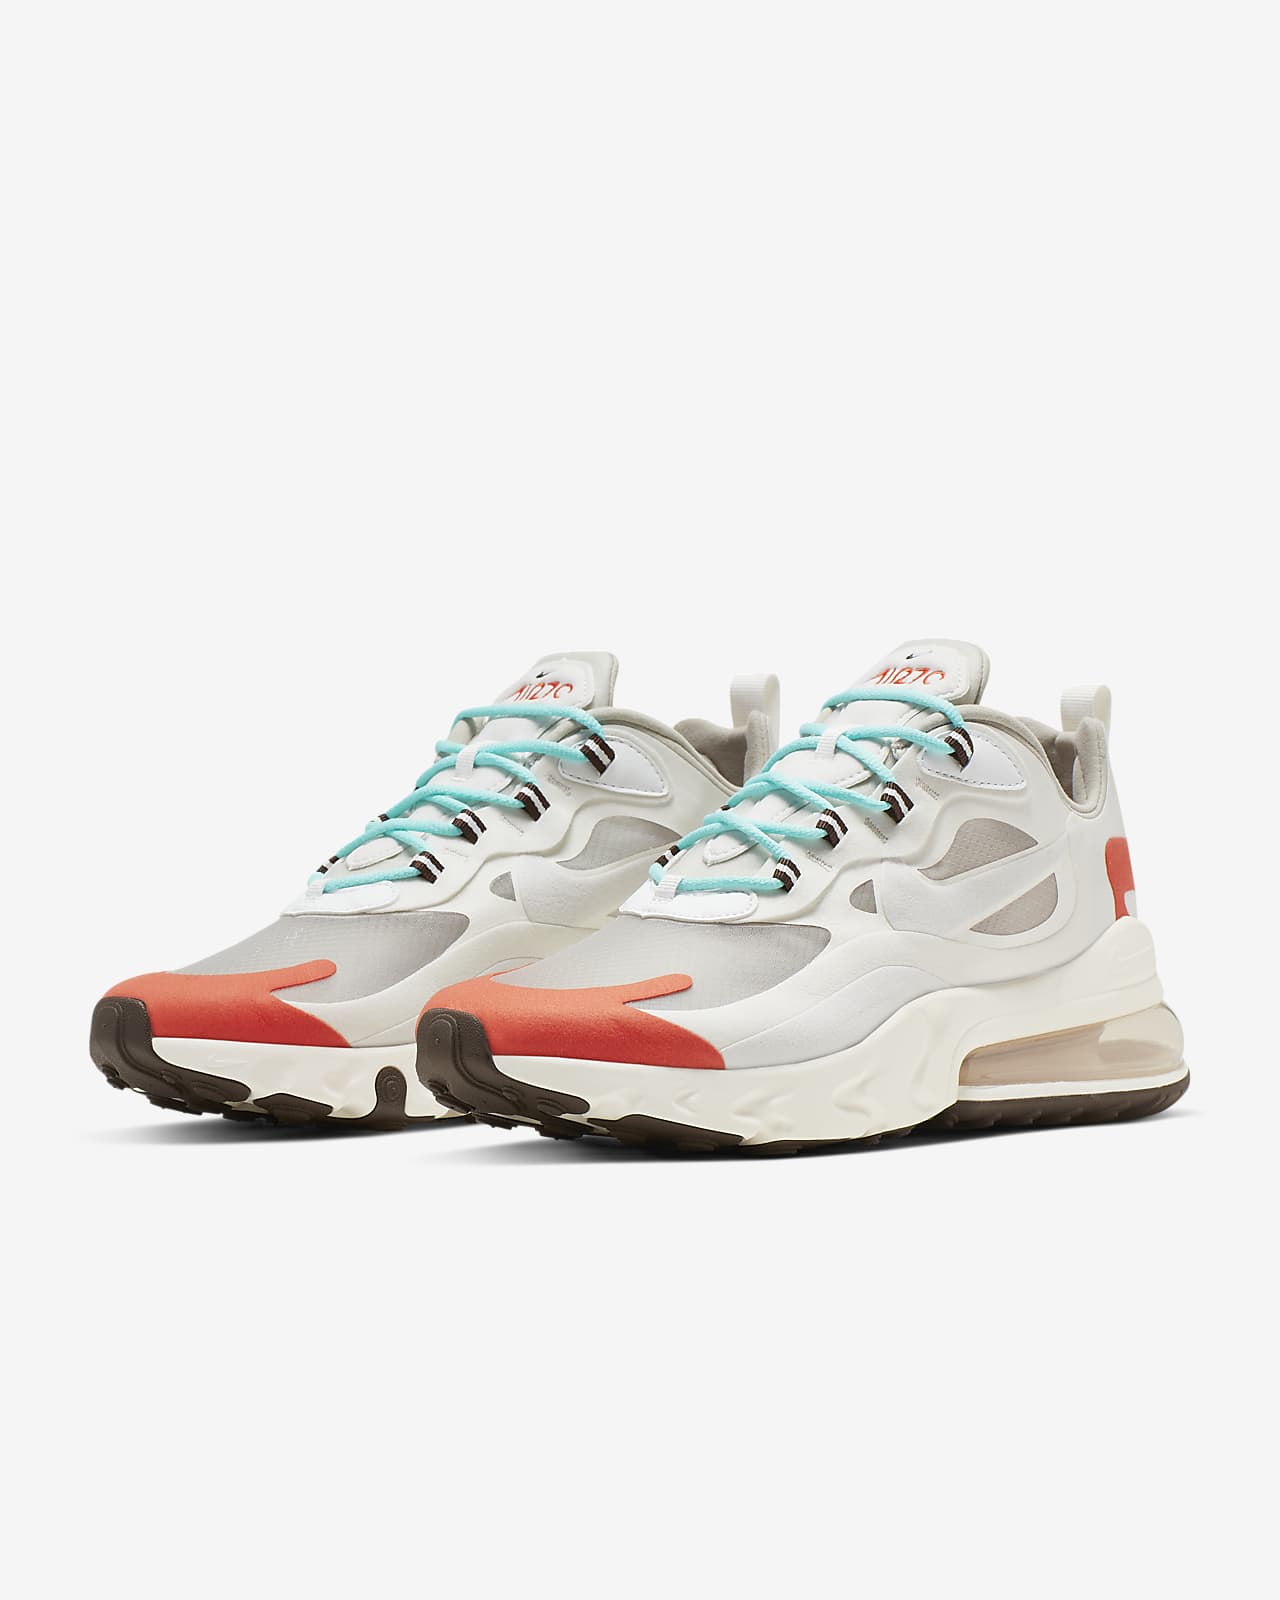 nike air max 270 react price in south africa